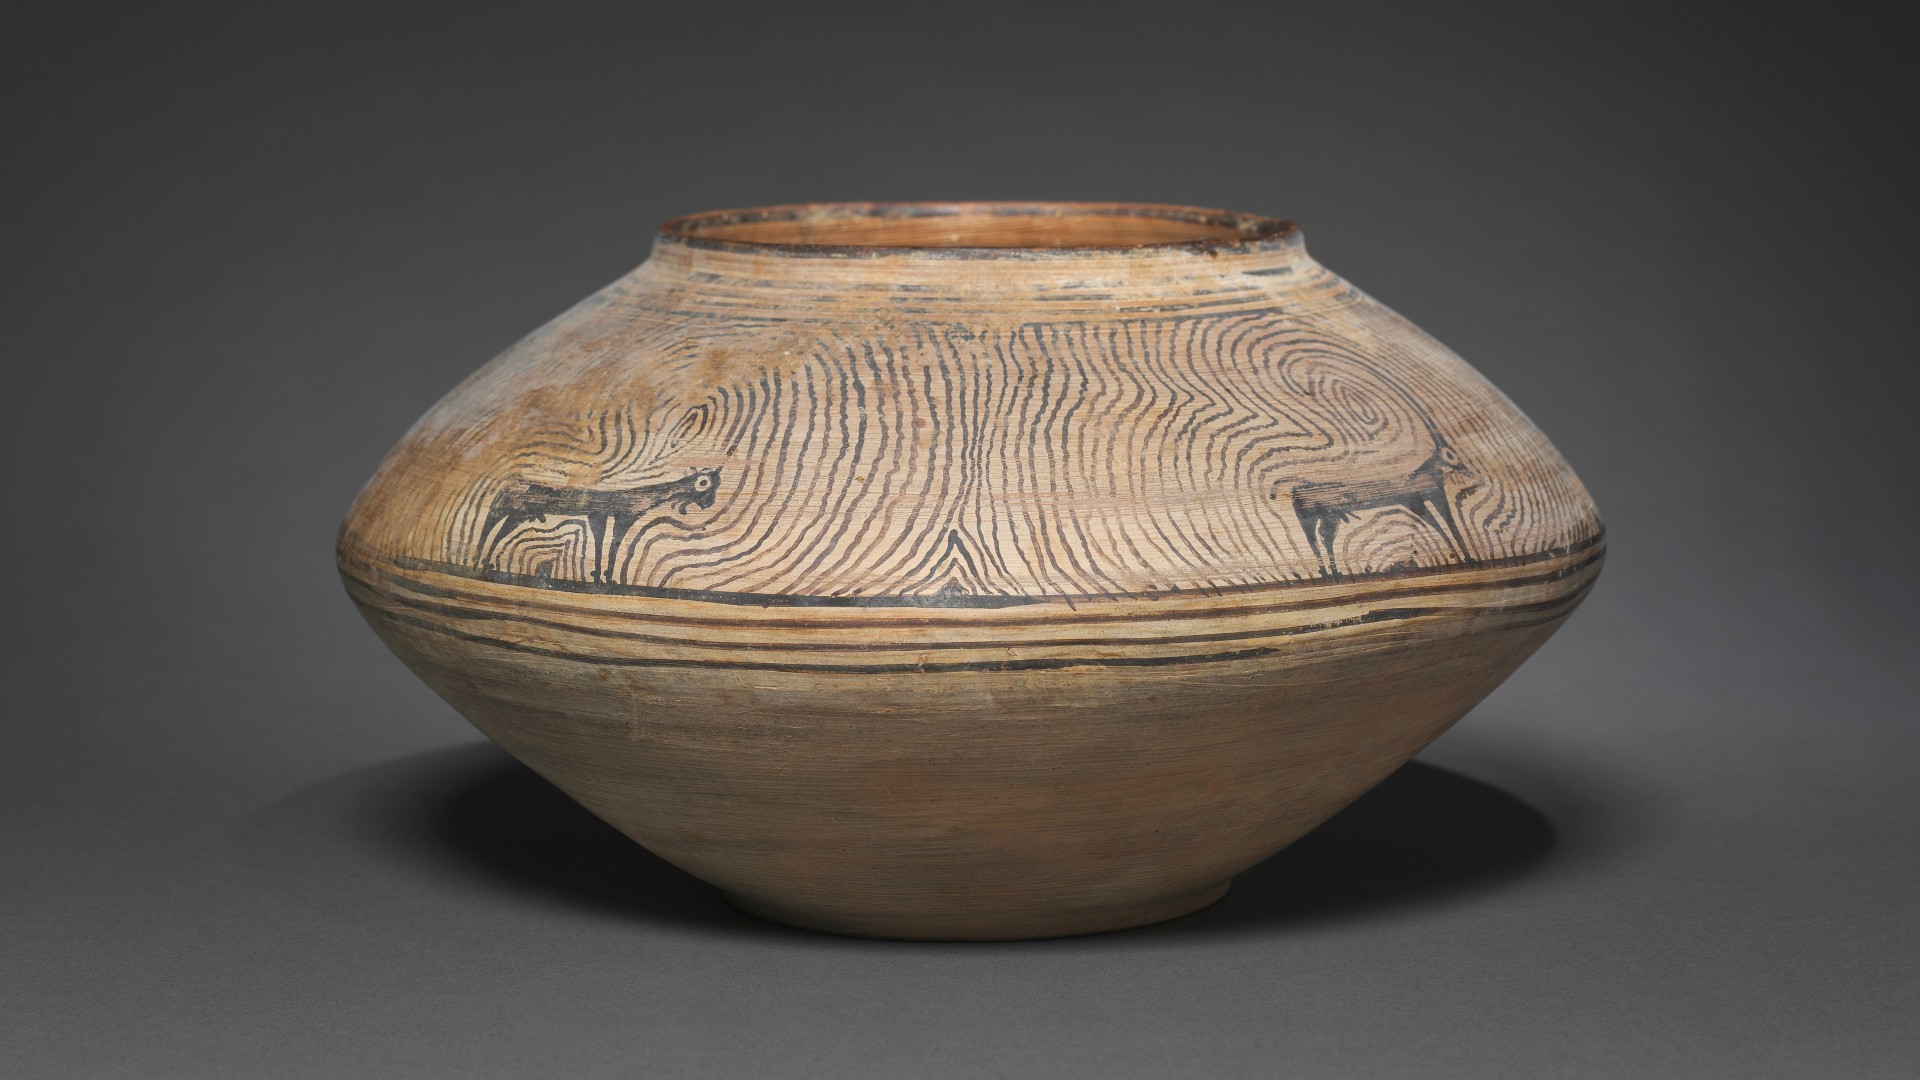 An Indus Valley Civilization ceramic vessel decorated with four ibex, circa 2800 B.C to 2500 B.C., Pakistan, probably Quetta. It measures 4.8 by 9 inches (12.2 by 23 centimeters).